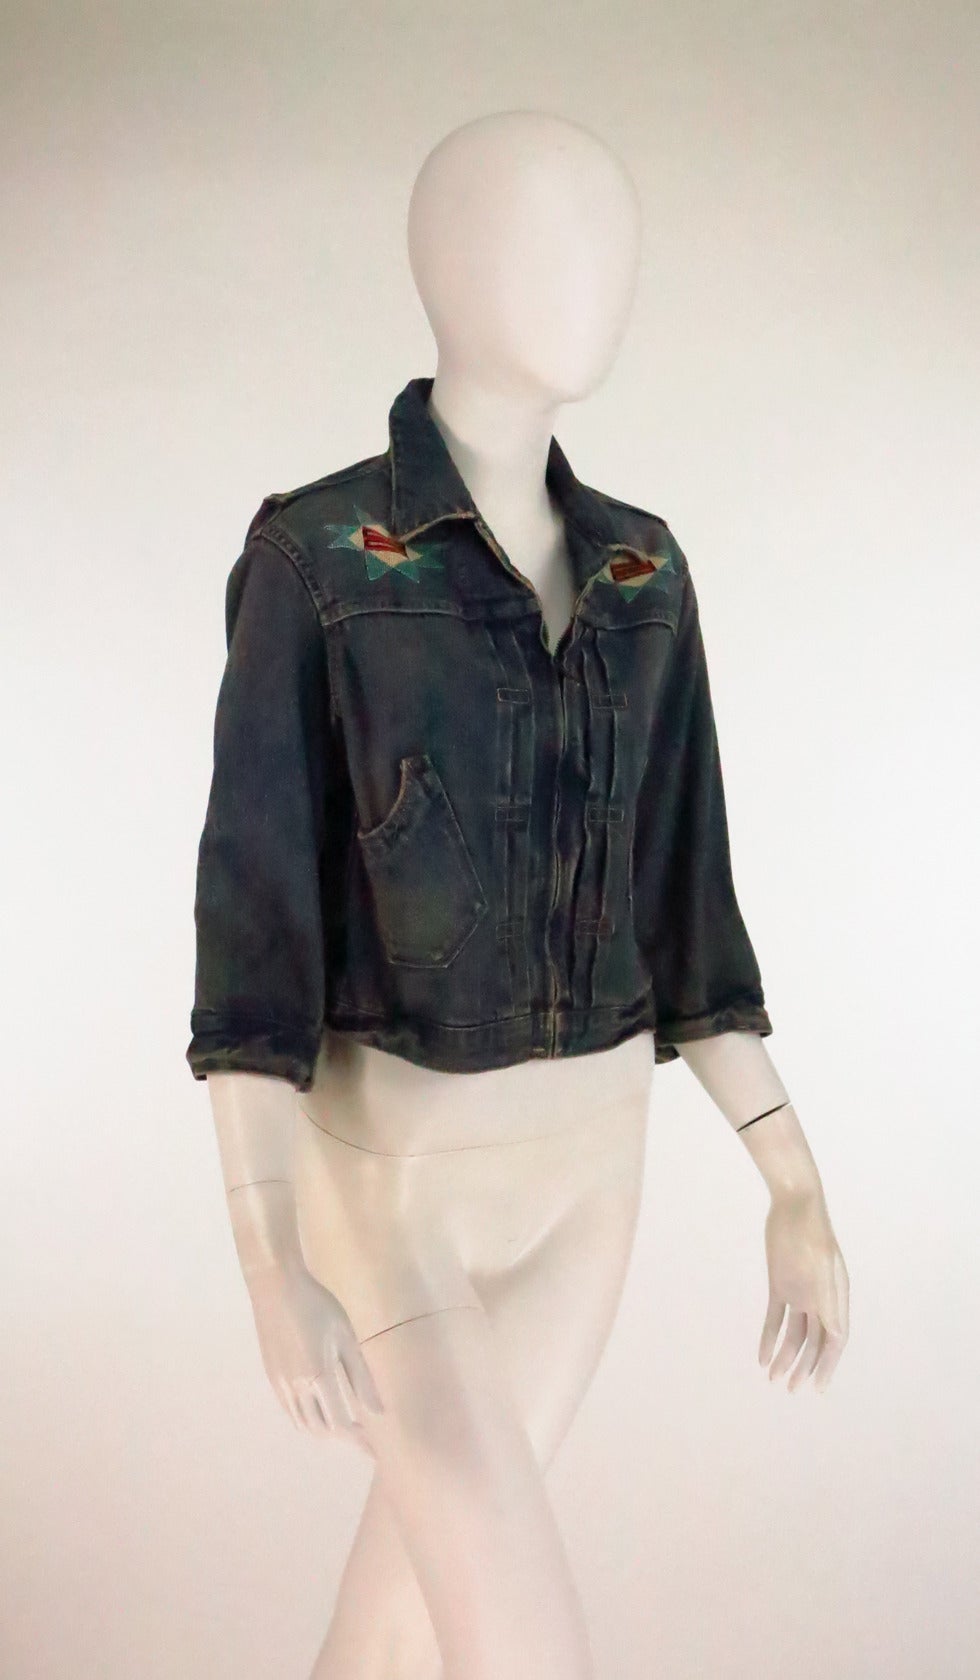 Ralph Lauren, Double RL beaded distressed denim jacket...3/4 length sleeve jacket closes at the front with a zipper, copper buttons at each sleeve cuff...Traditional denim flat felled seams...Front shaped open pockets at each side...Hand beaded